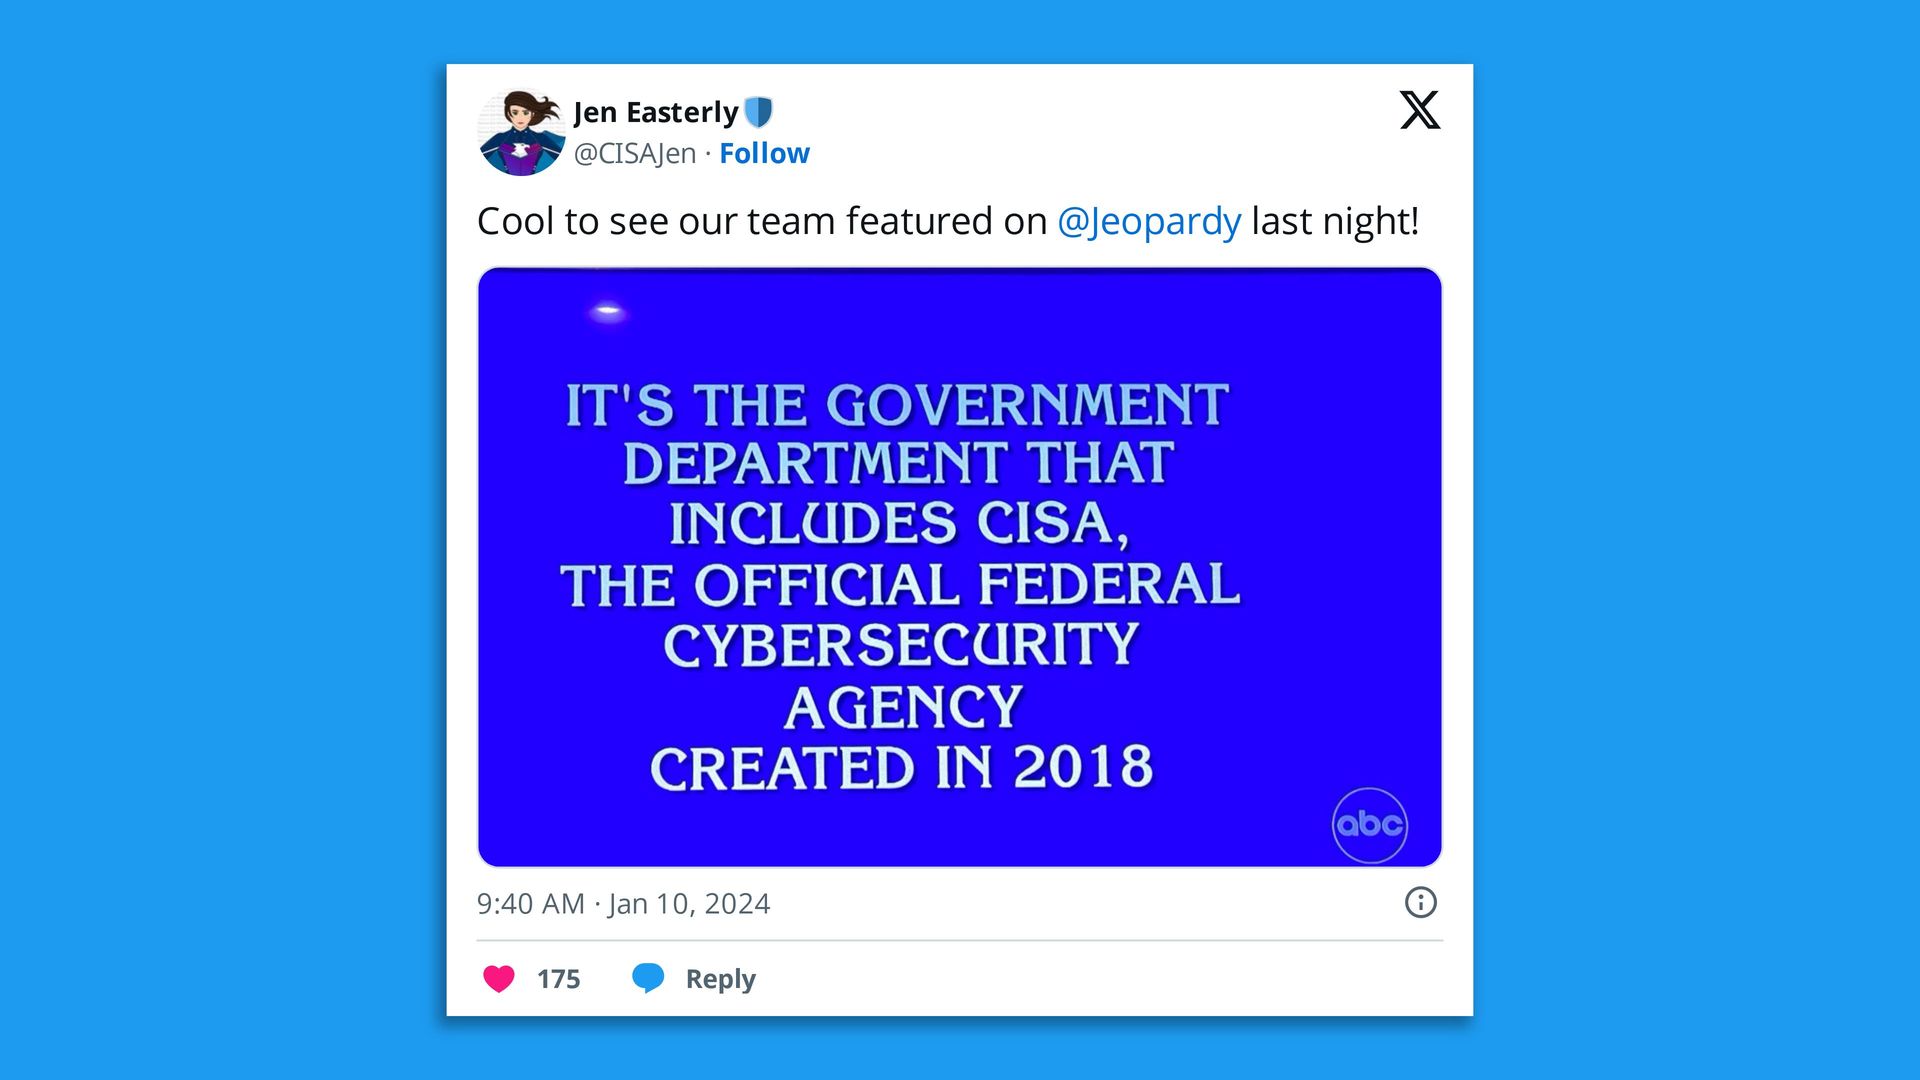 Screenshot of a tweet from CISA Director Jen Easterly about a Jeopardy answer mentioning her agency